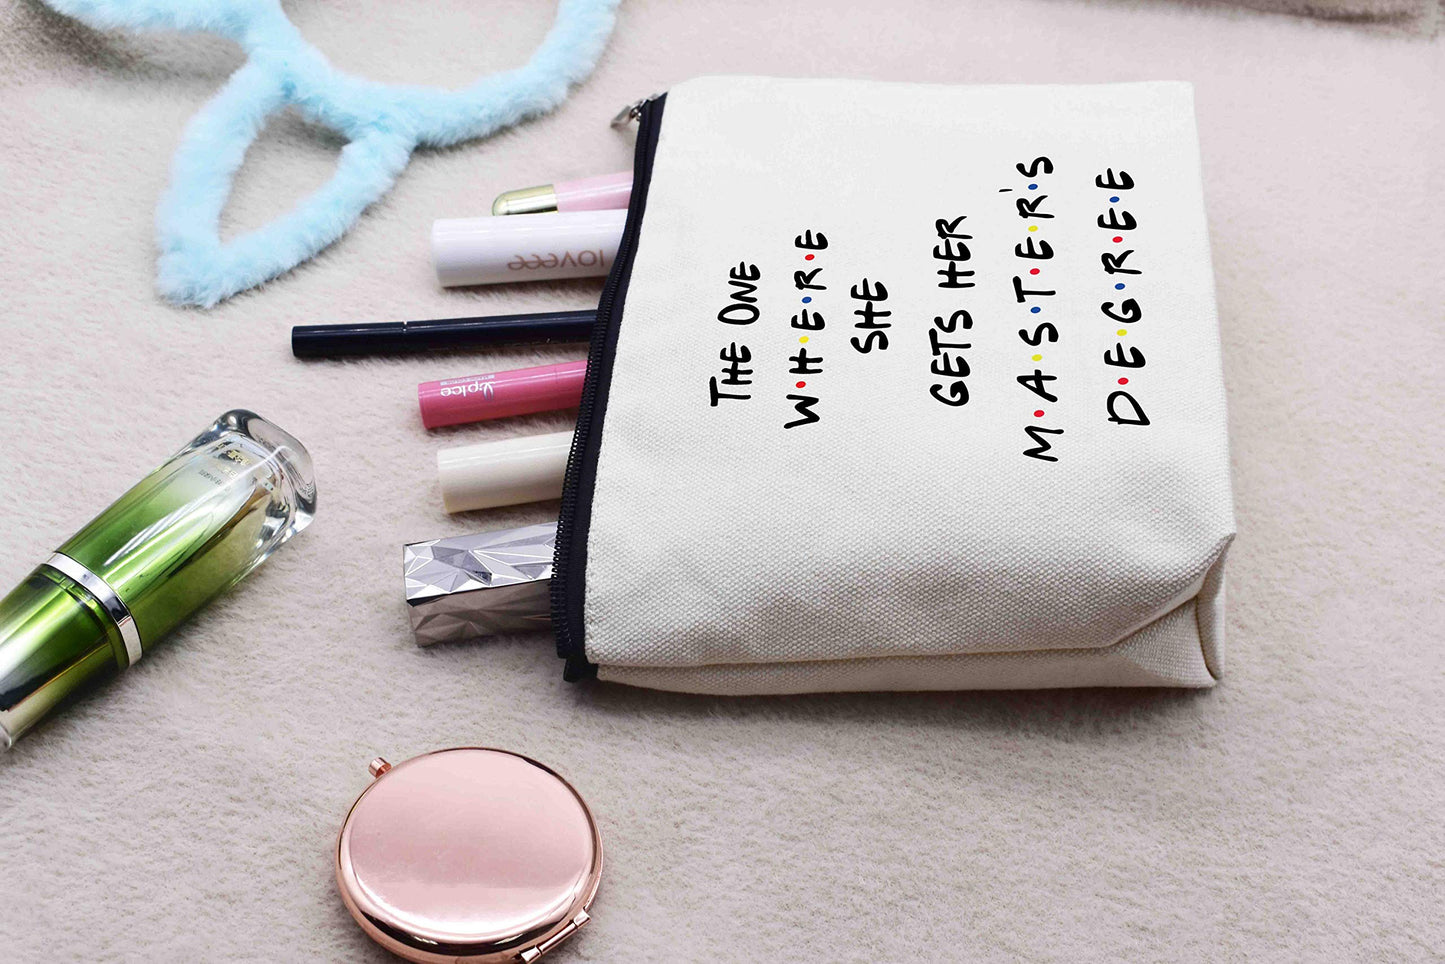 Unique Masters Degree Gift for Grad Student - MBA Gifts - Grad Student Graduation Gift for Best Friend Daughter Cousin Sister - The One Where She Gets Her Master's Degree - Makeup Bag Cosmetic Bag